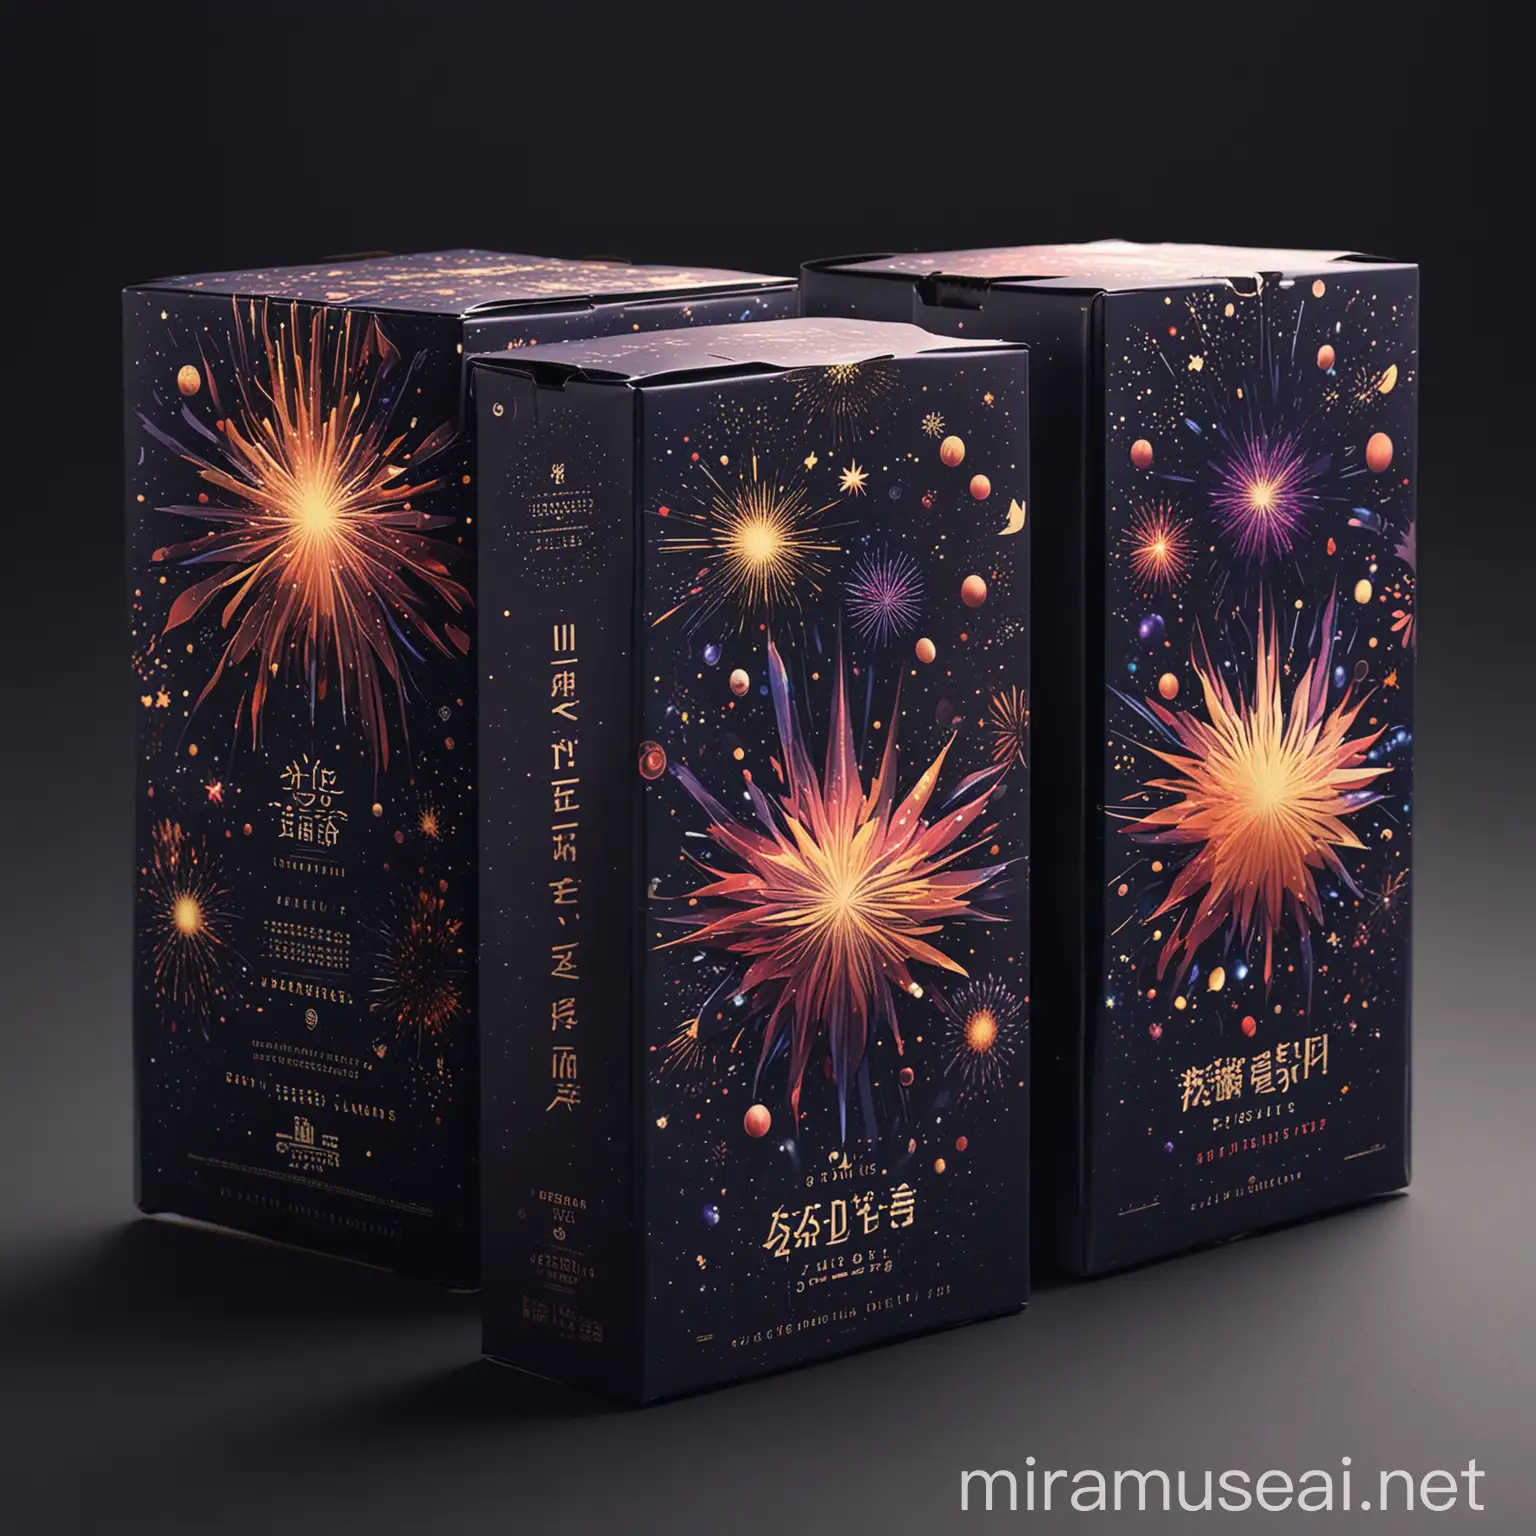 Please provide the fireworks packaging design, I need a series of 5 designs. The design theme is cosmic style and galactic wind. Mysterious and sophisticated feeling. I need 5 designs from the same series.